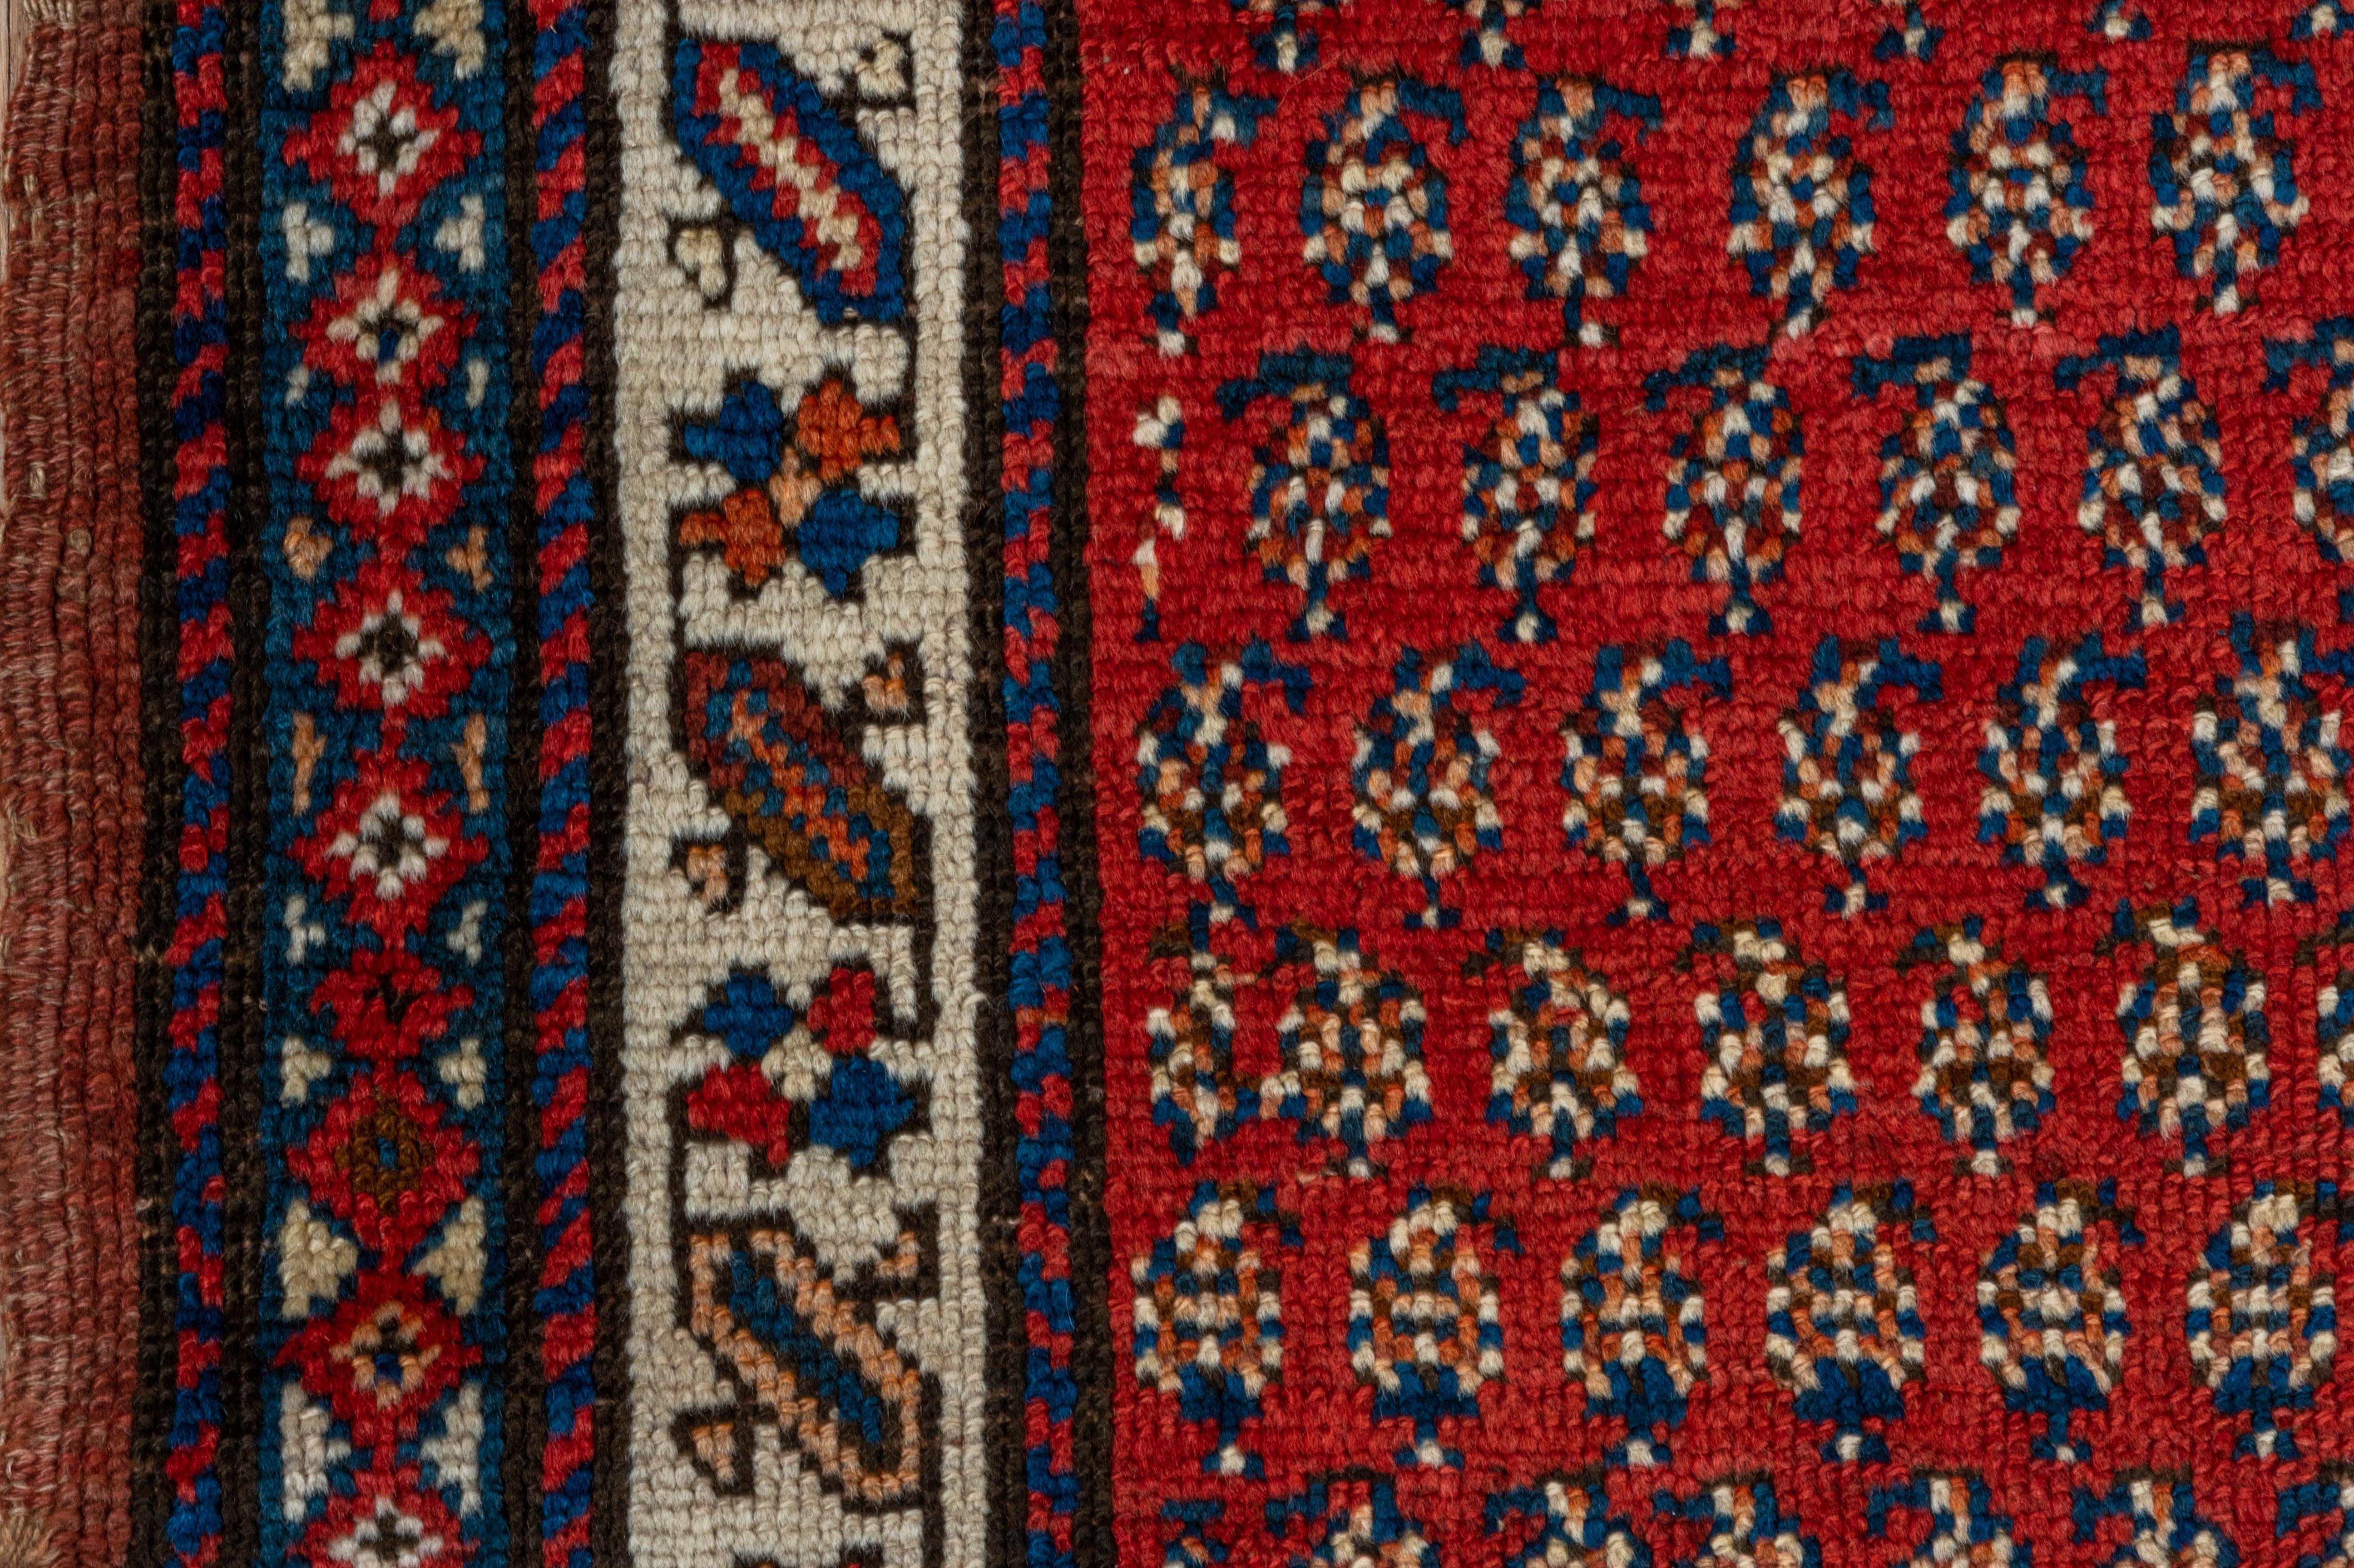 The saturated red field on this Northwest Persian rug contains offset rows of tiny floriated botehs The narrow cream border shows crosshatches and slanted bars, connected by a geometric meander .Cream, blue and orange details Moderate weave, good